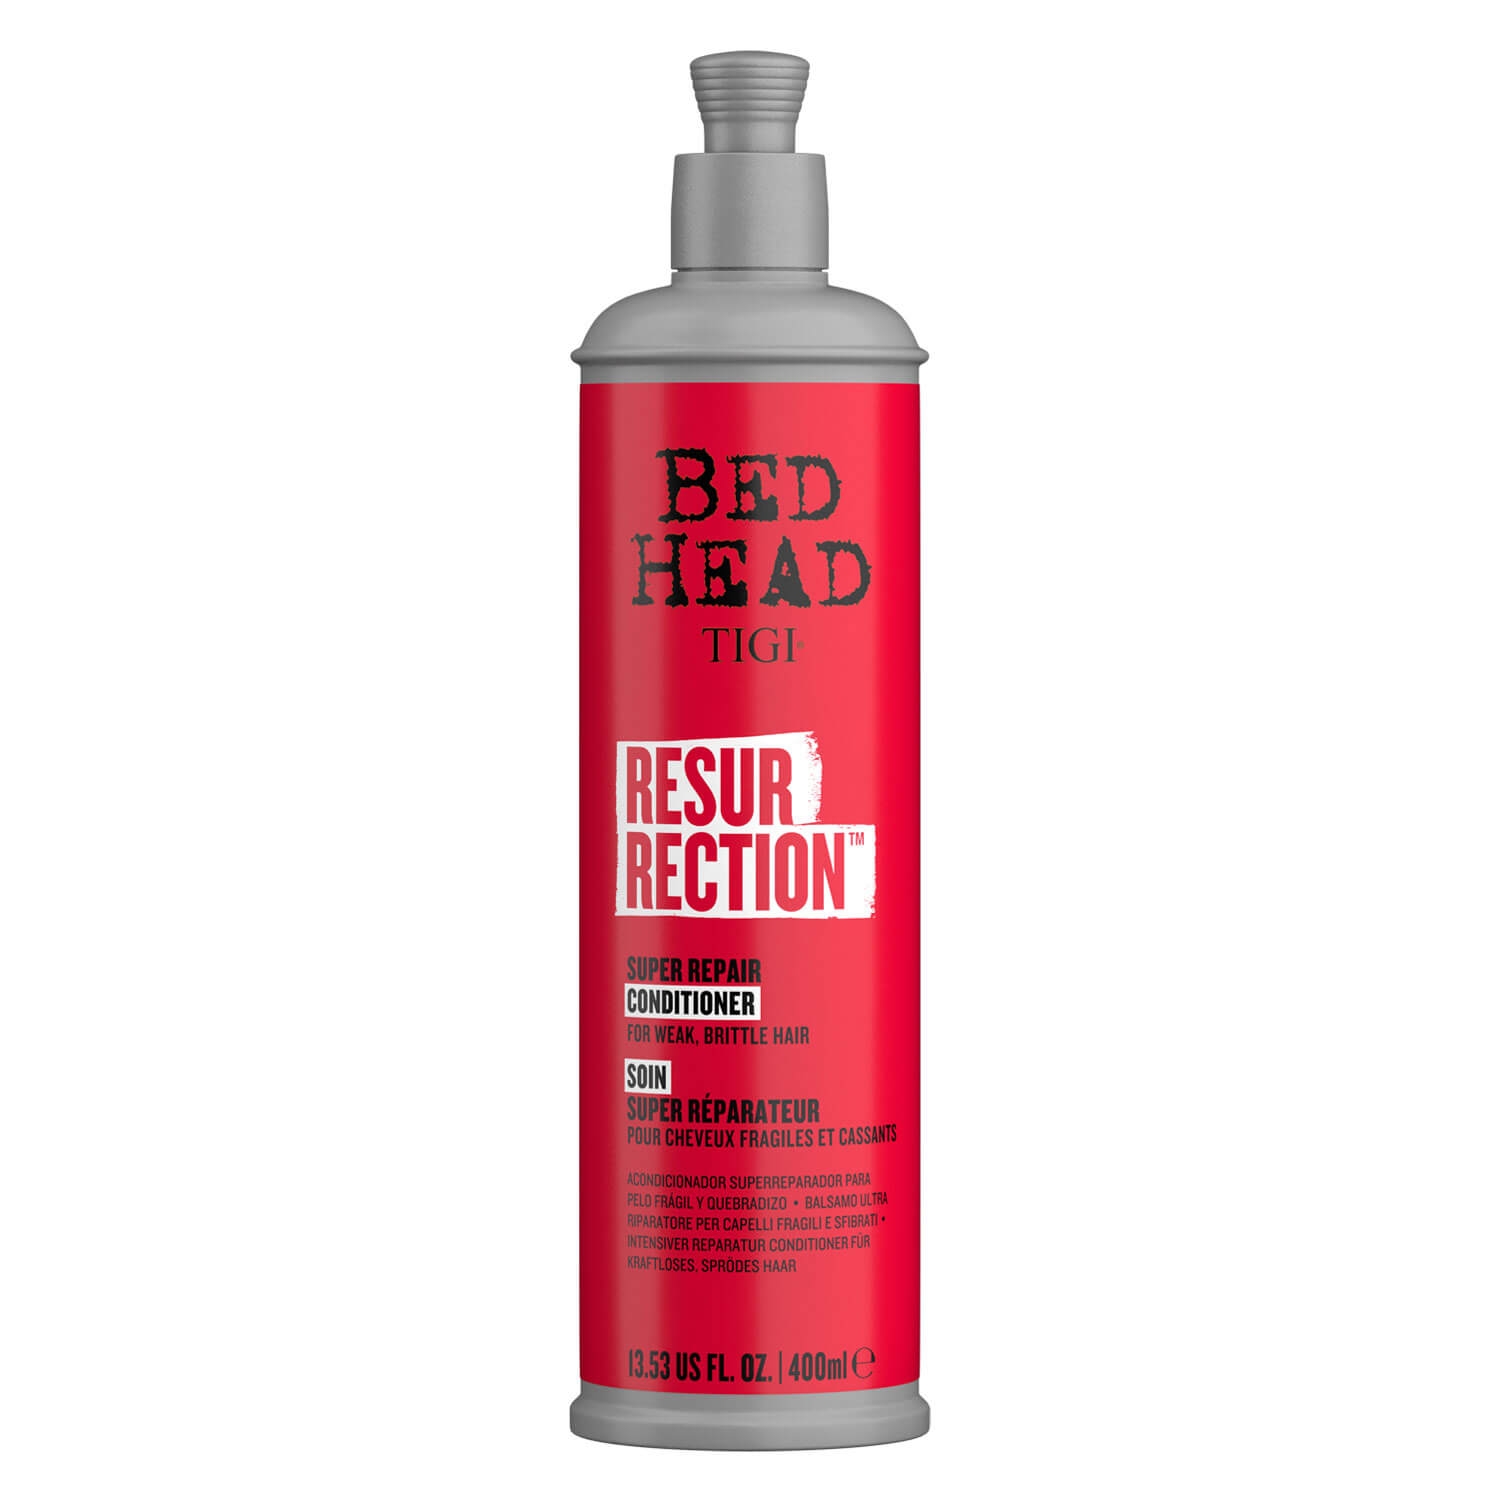 Product image from Bed Head Urban Antidotes - Resurrection Conditioner